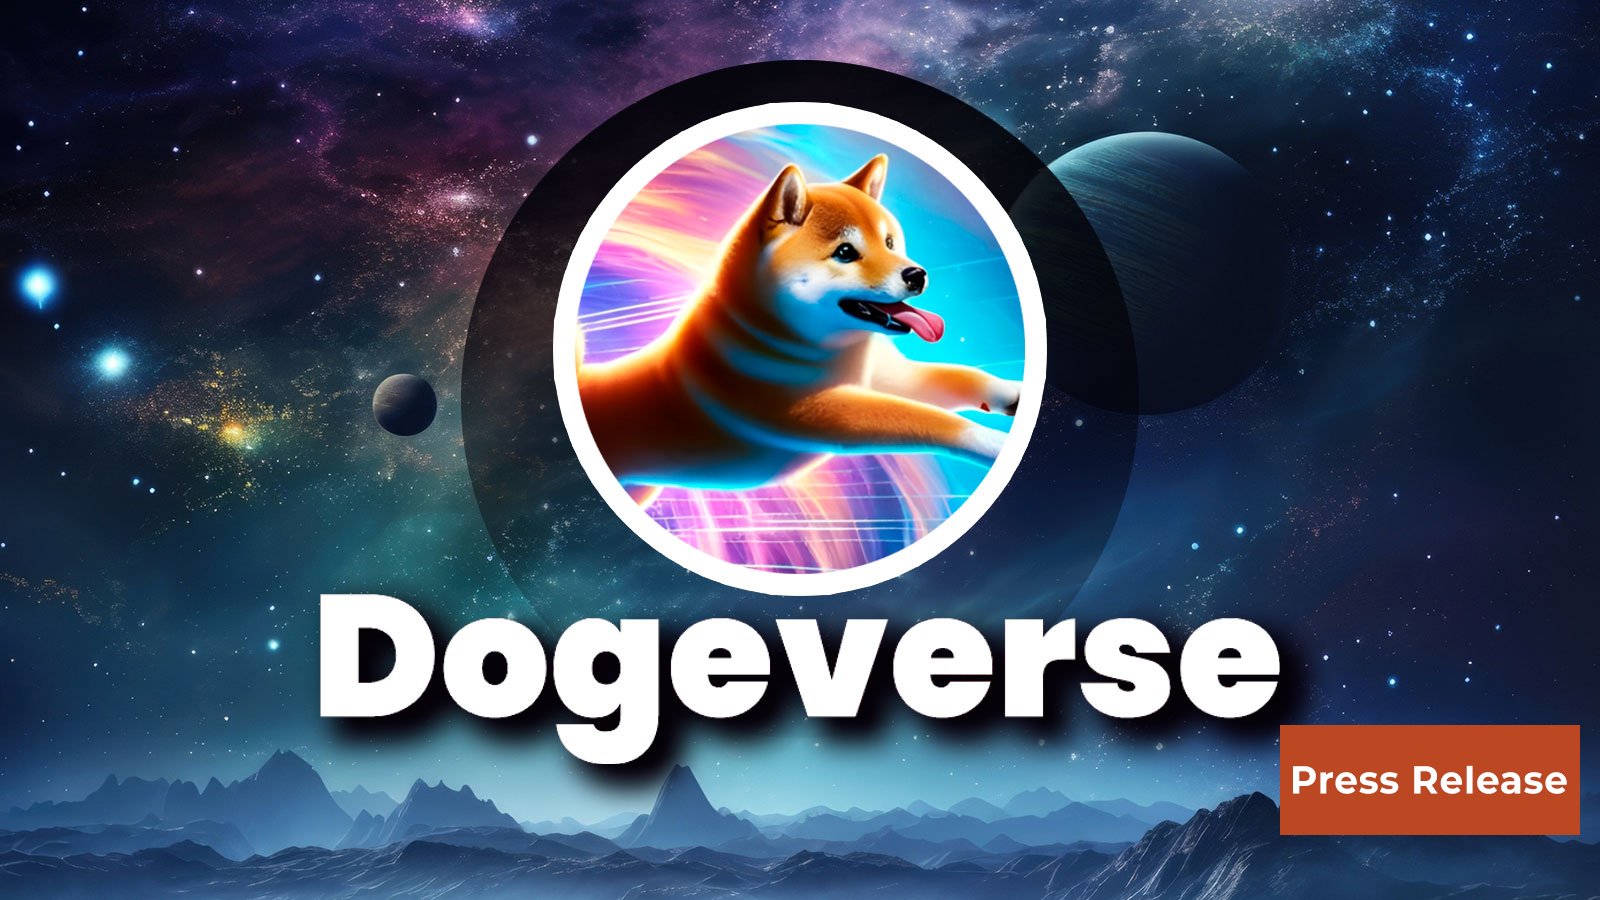 New Multi-Chain Meme Coin Dogeverse Goes Live and Raises $2M In First 48 Hours